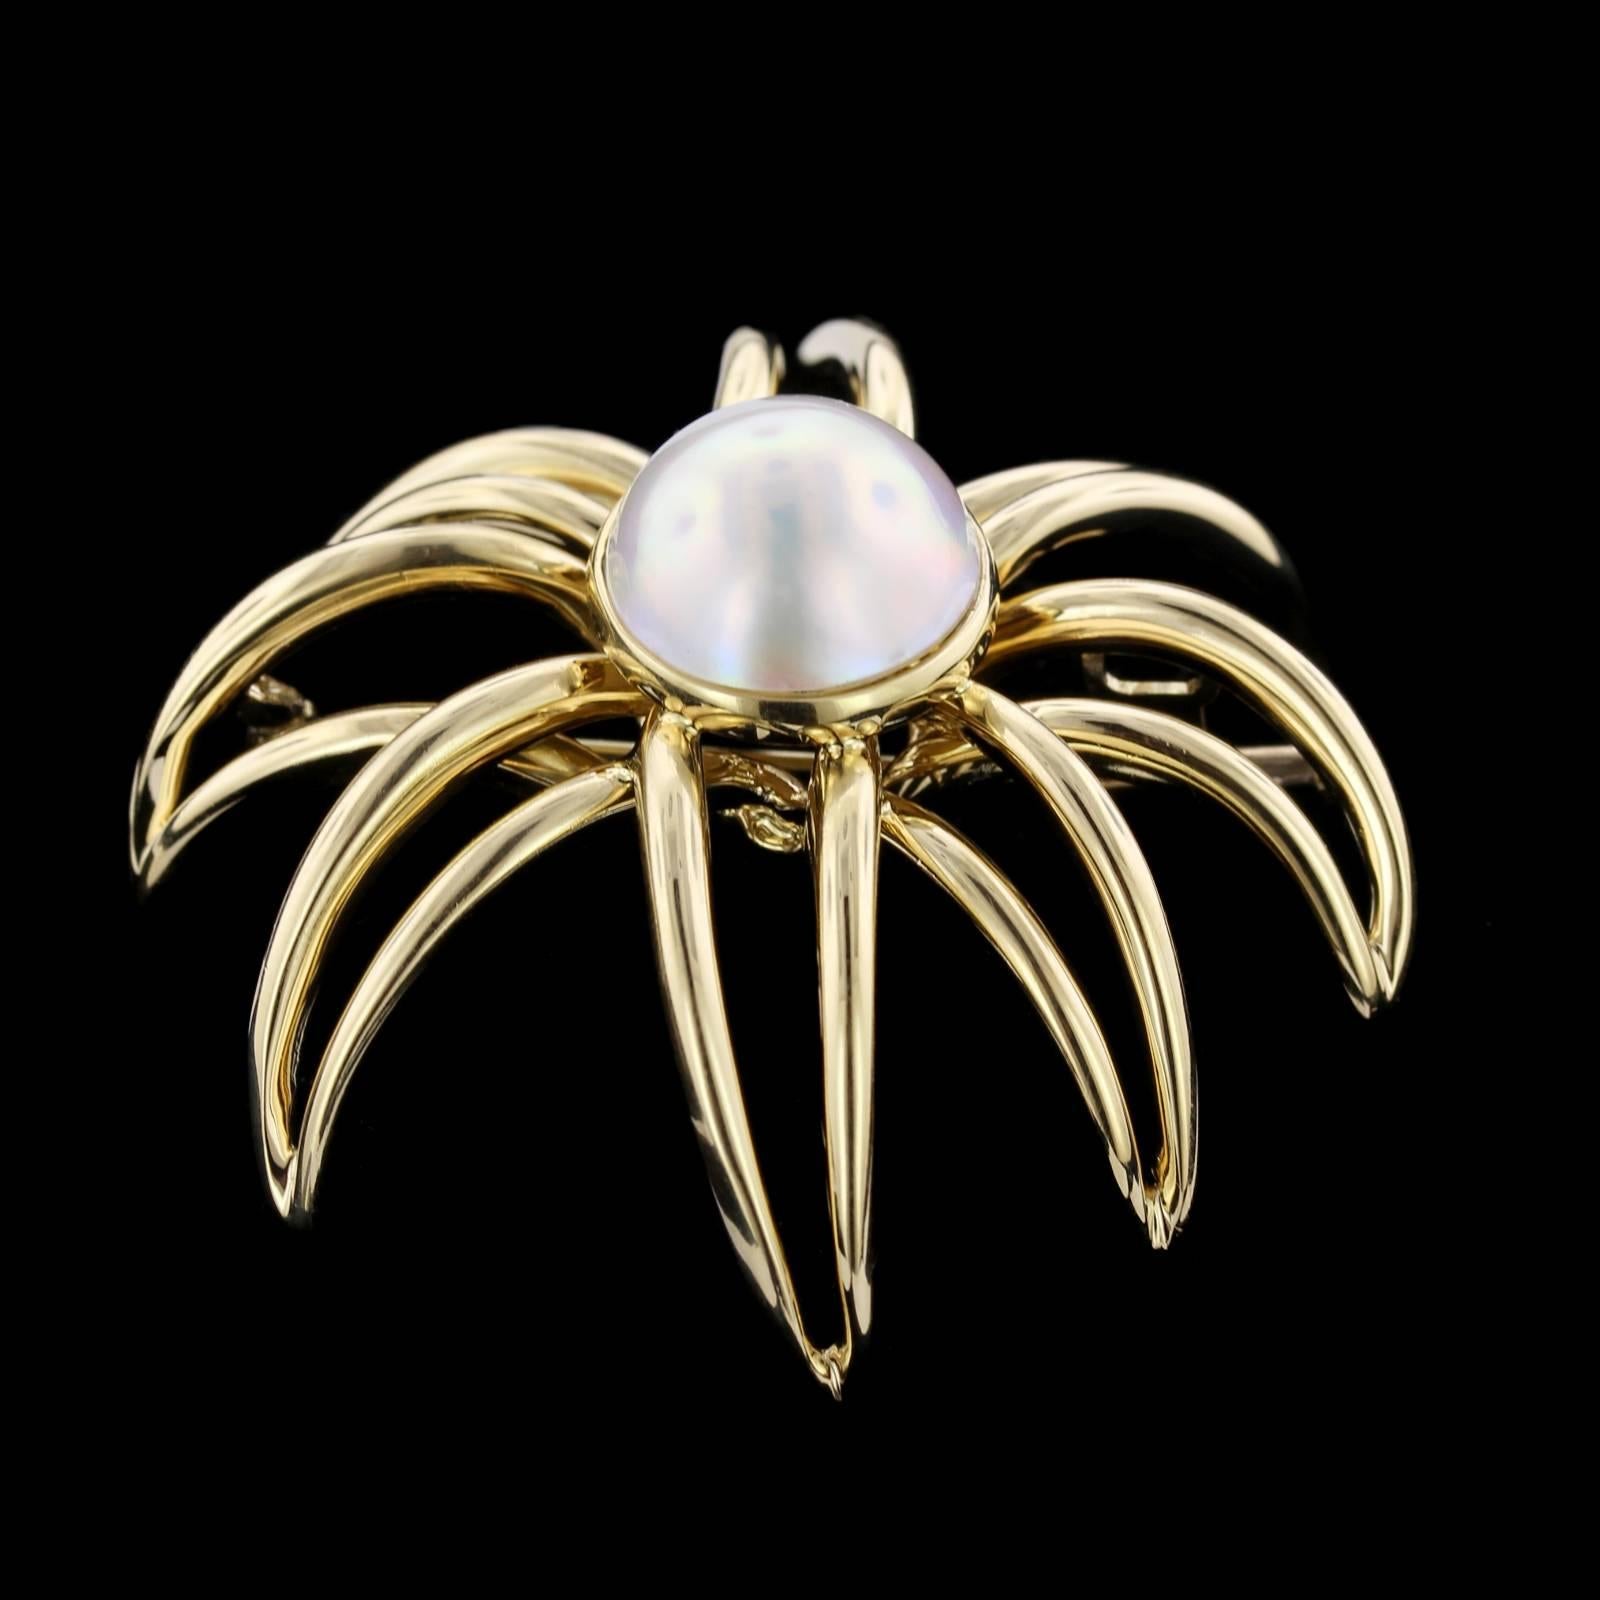 Tiffany & Co. 18K Yellow Gold Mabe Pearl Fireworks Brooch. The brooch is set with a mabe pearl measuring 14.50mm., diameter 1 15/16